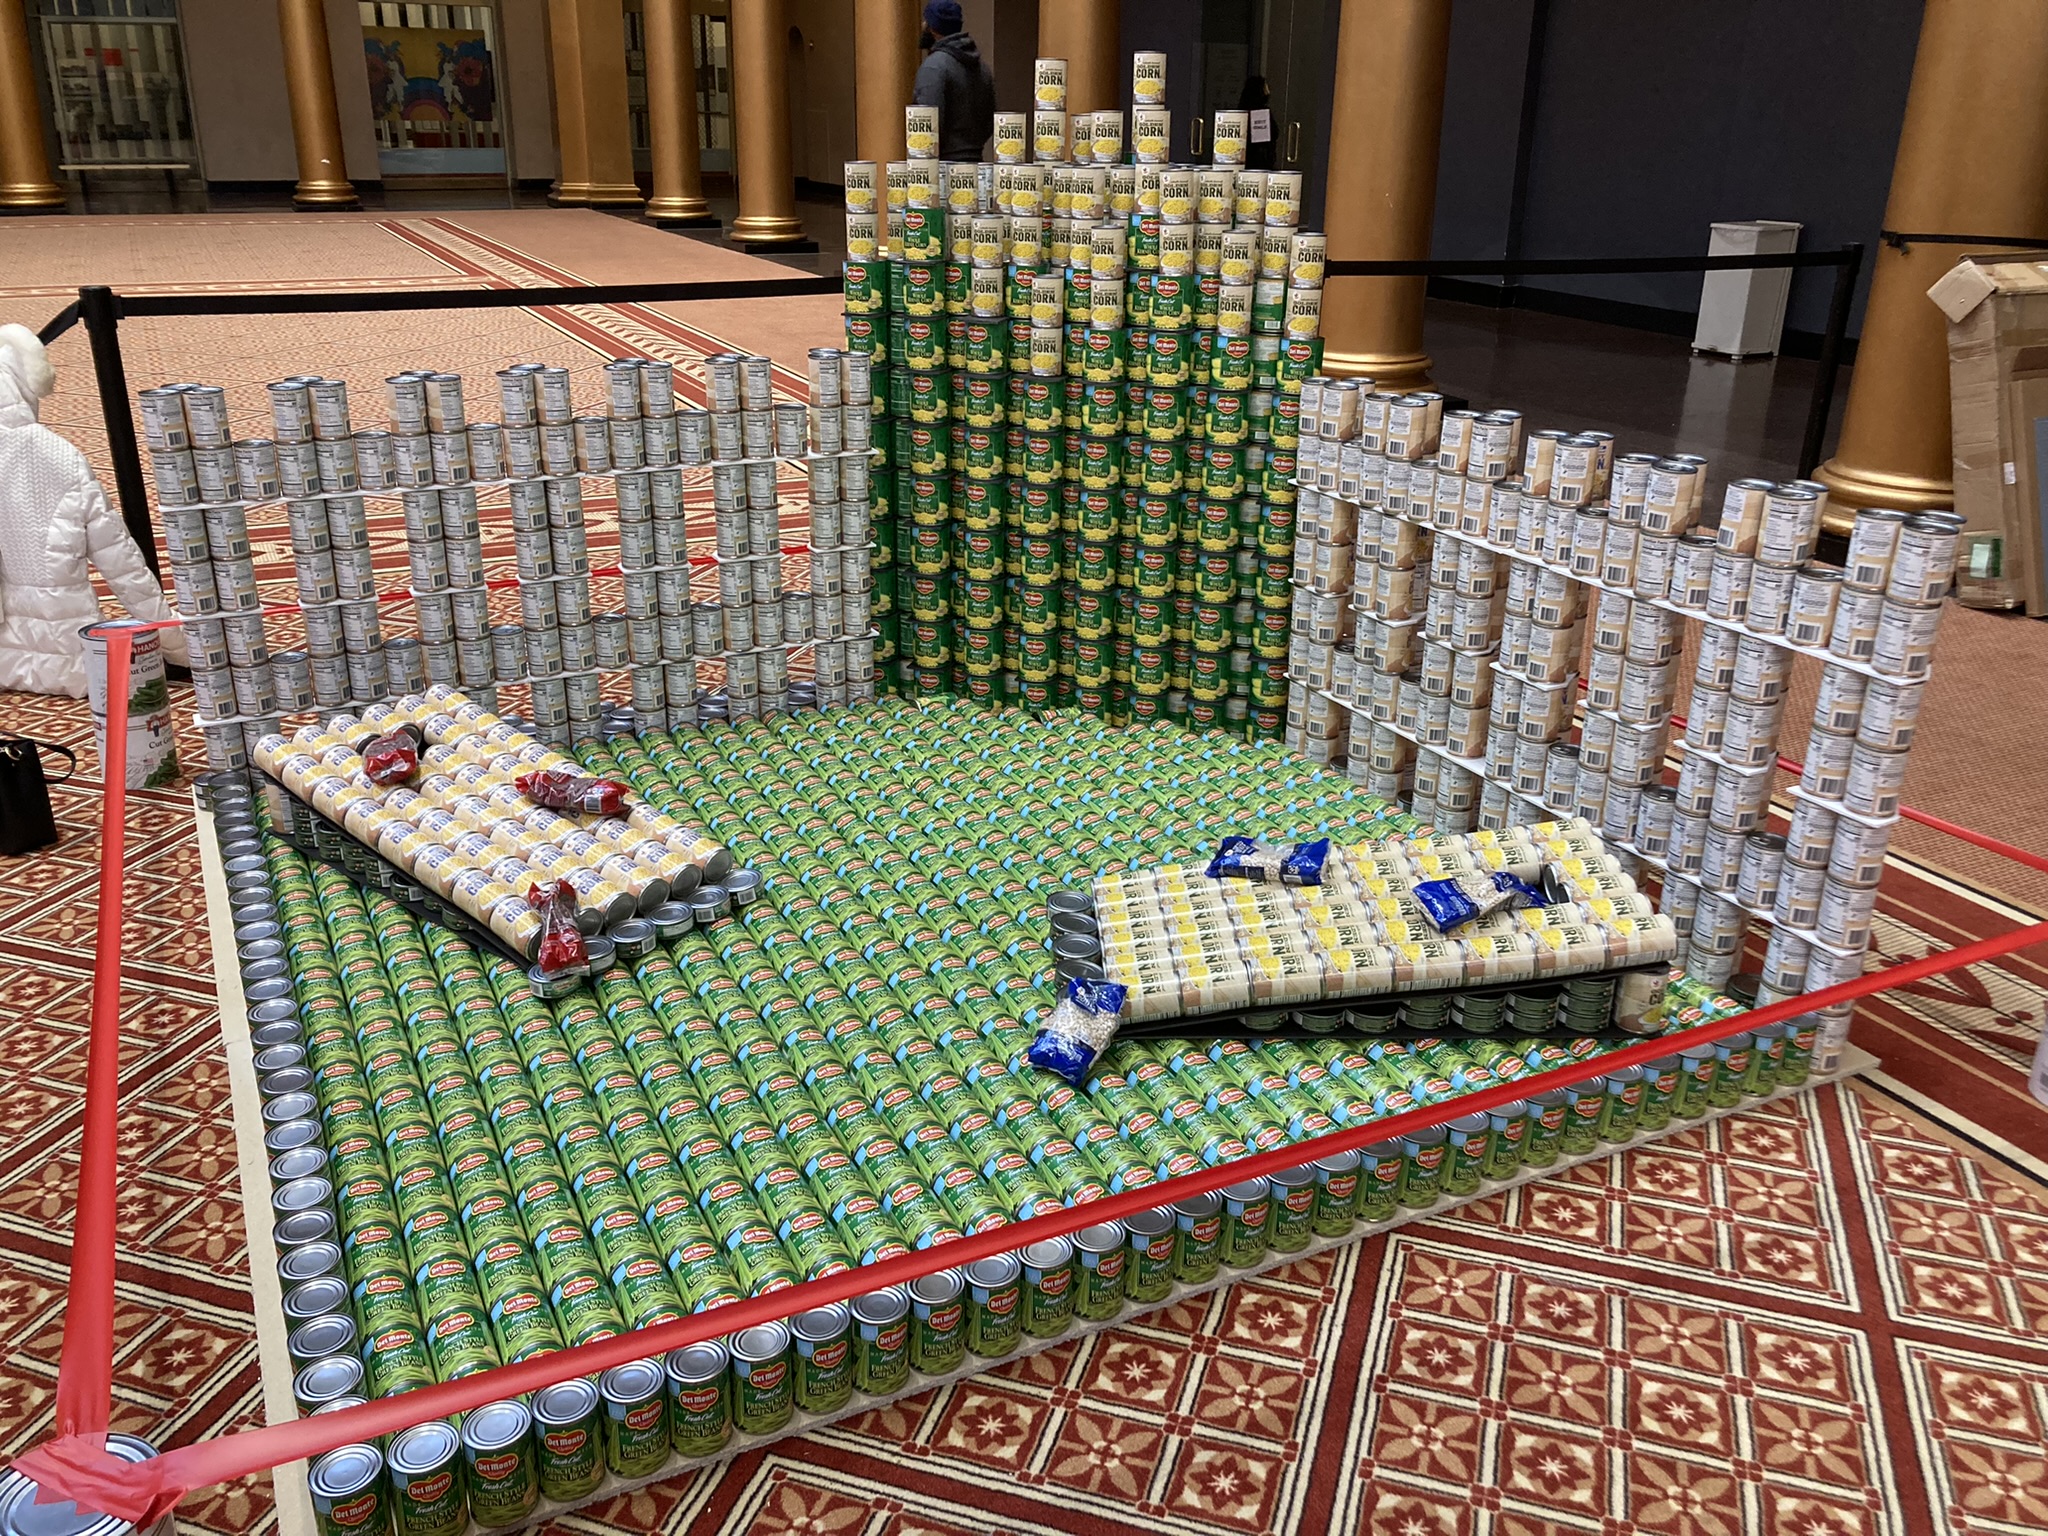 Image of canned food sculpture in shape of cornhole set